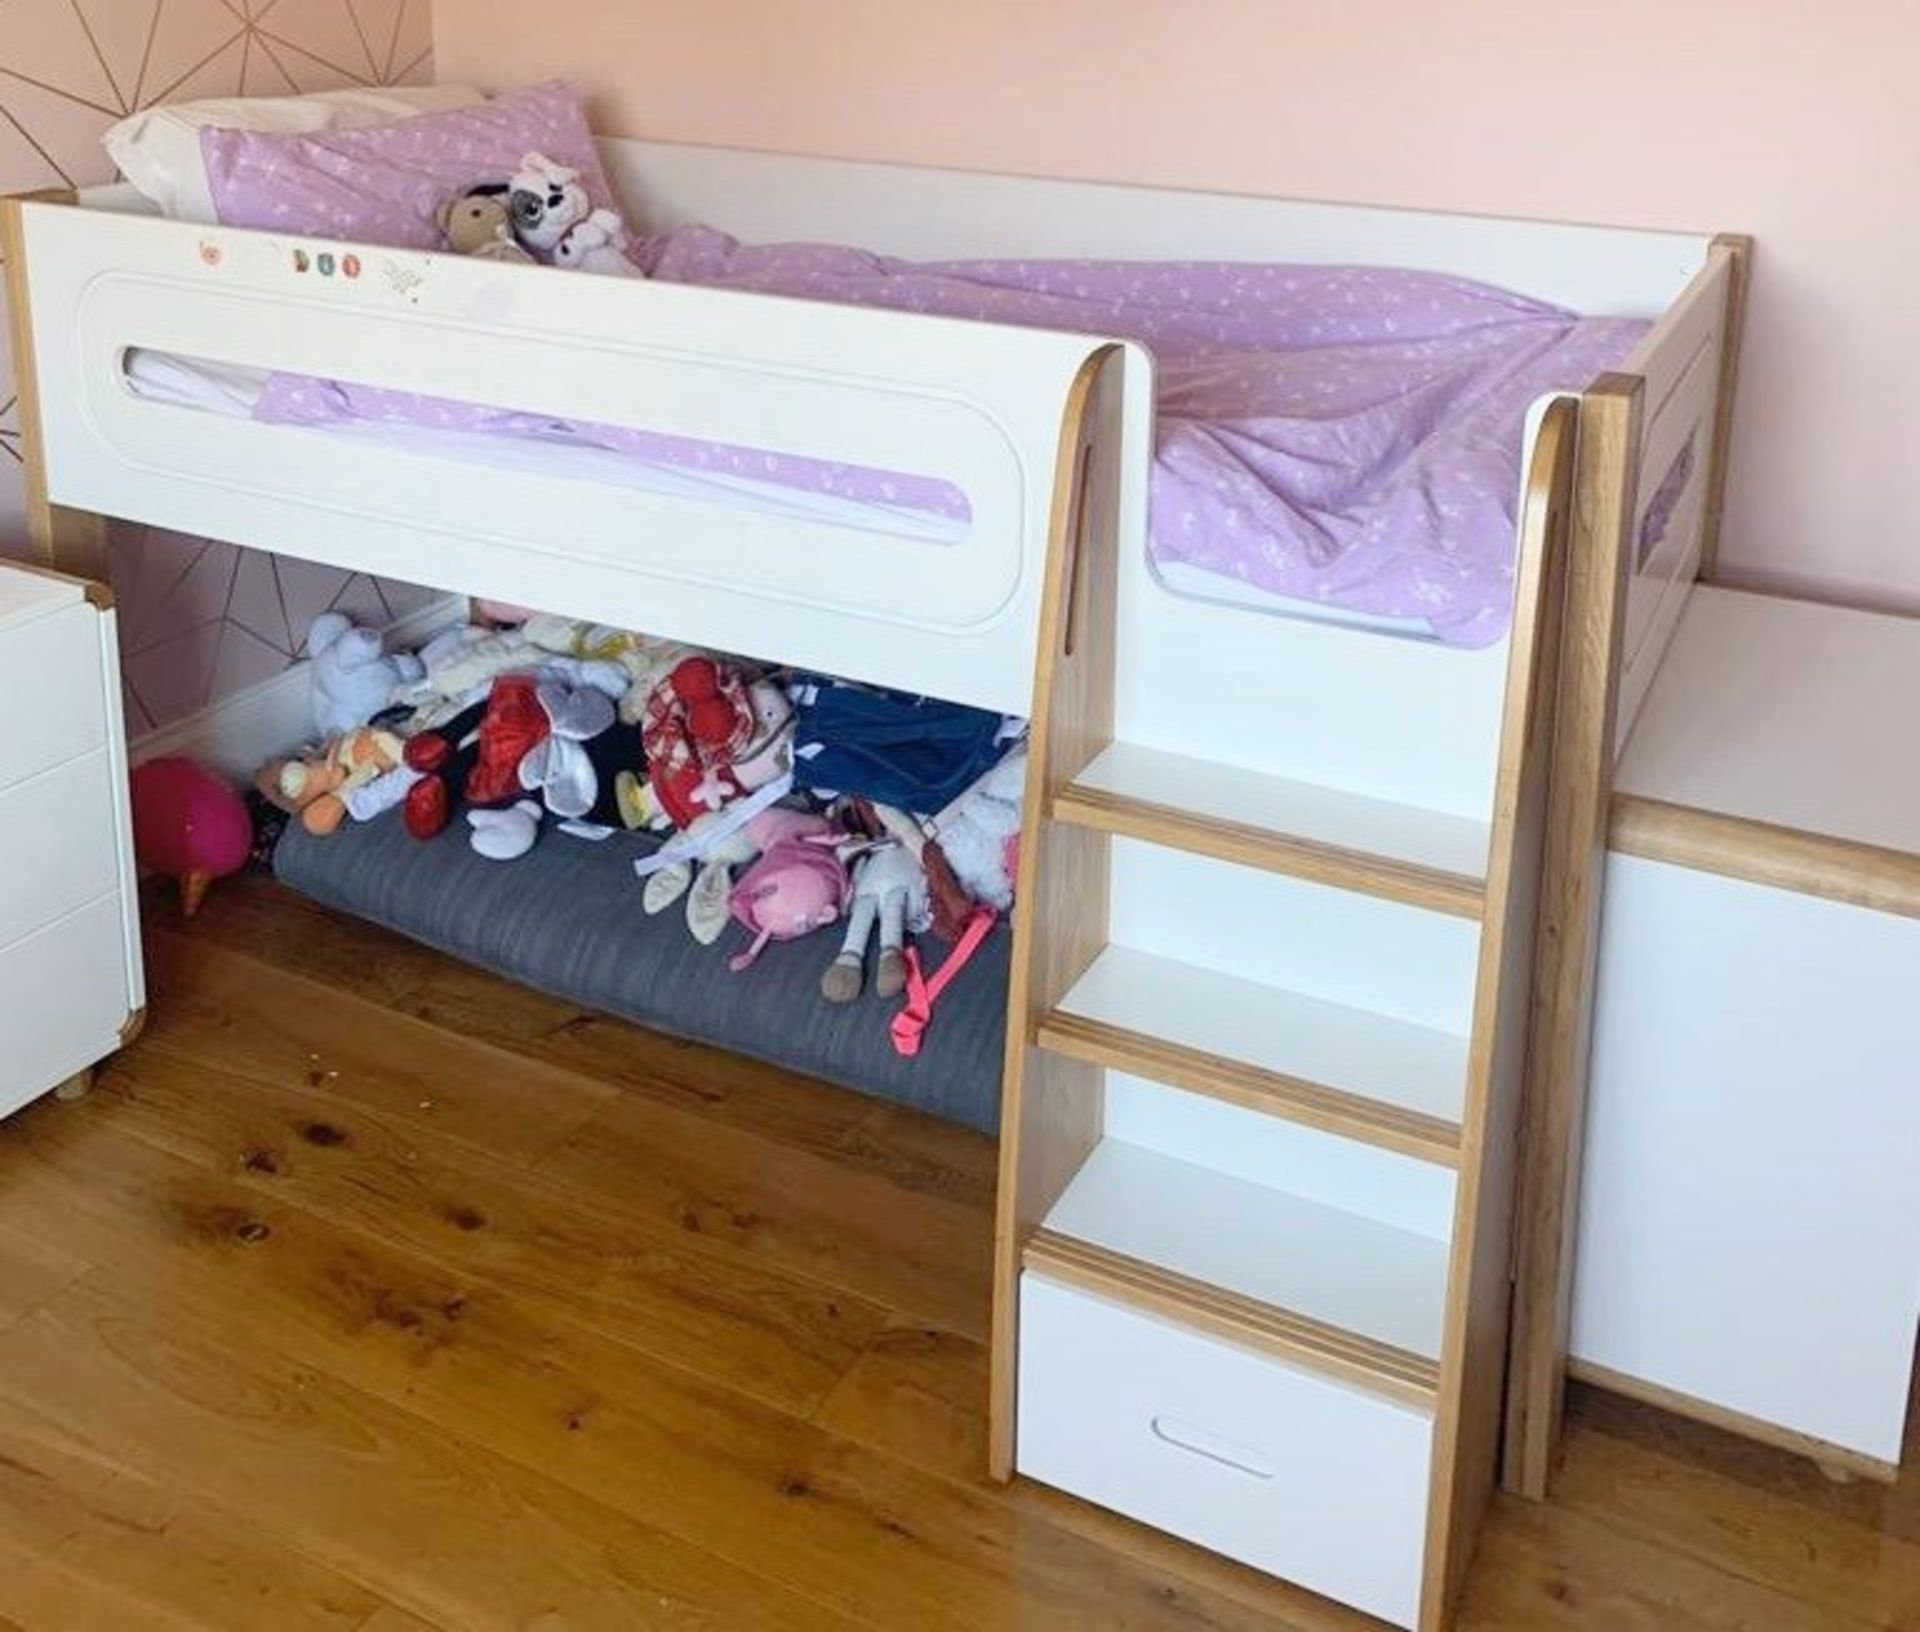 1 x 4-Piece STOMPA 'Curve' Children's Premium Bedroom Set Includes Mid Sleeper Bed In A White & - Image 8 of 9